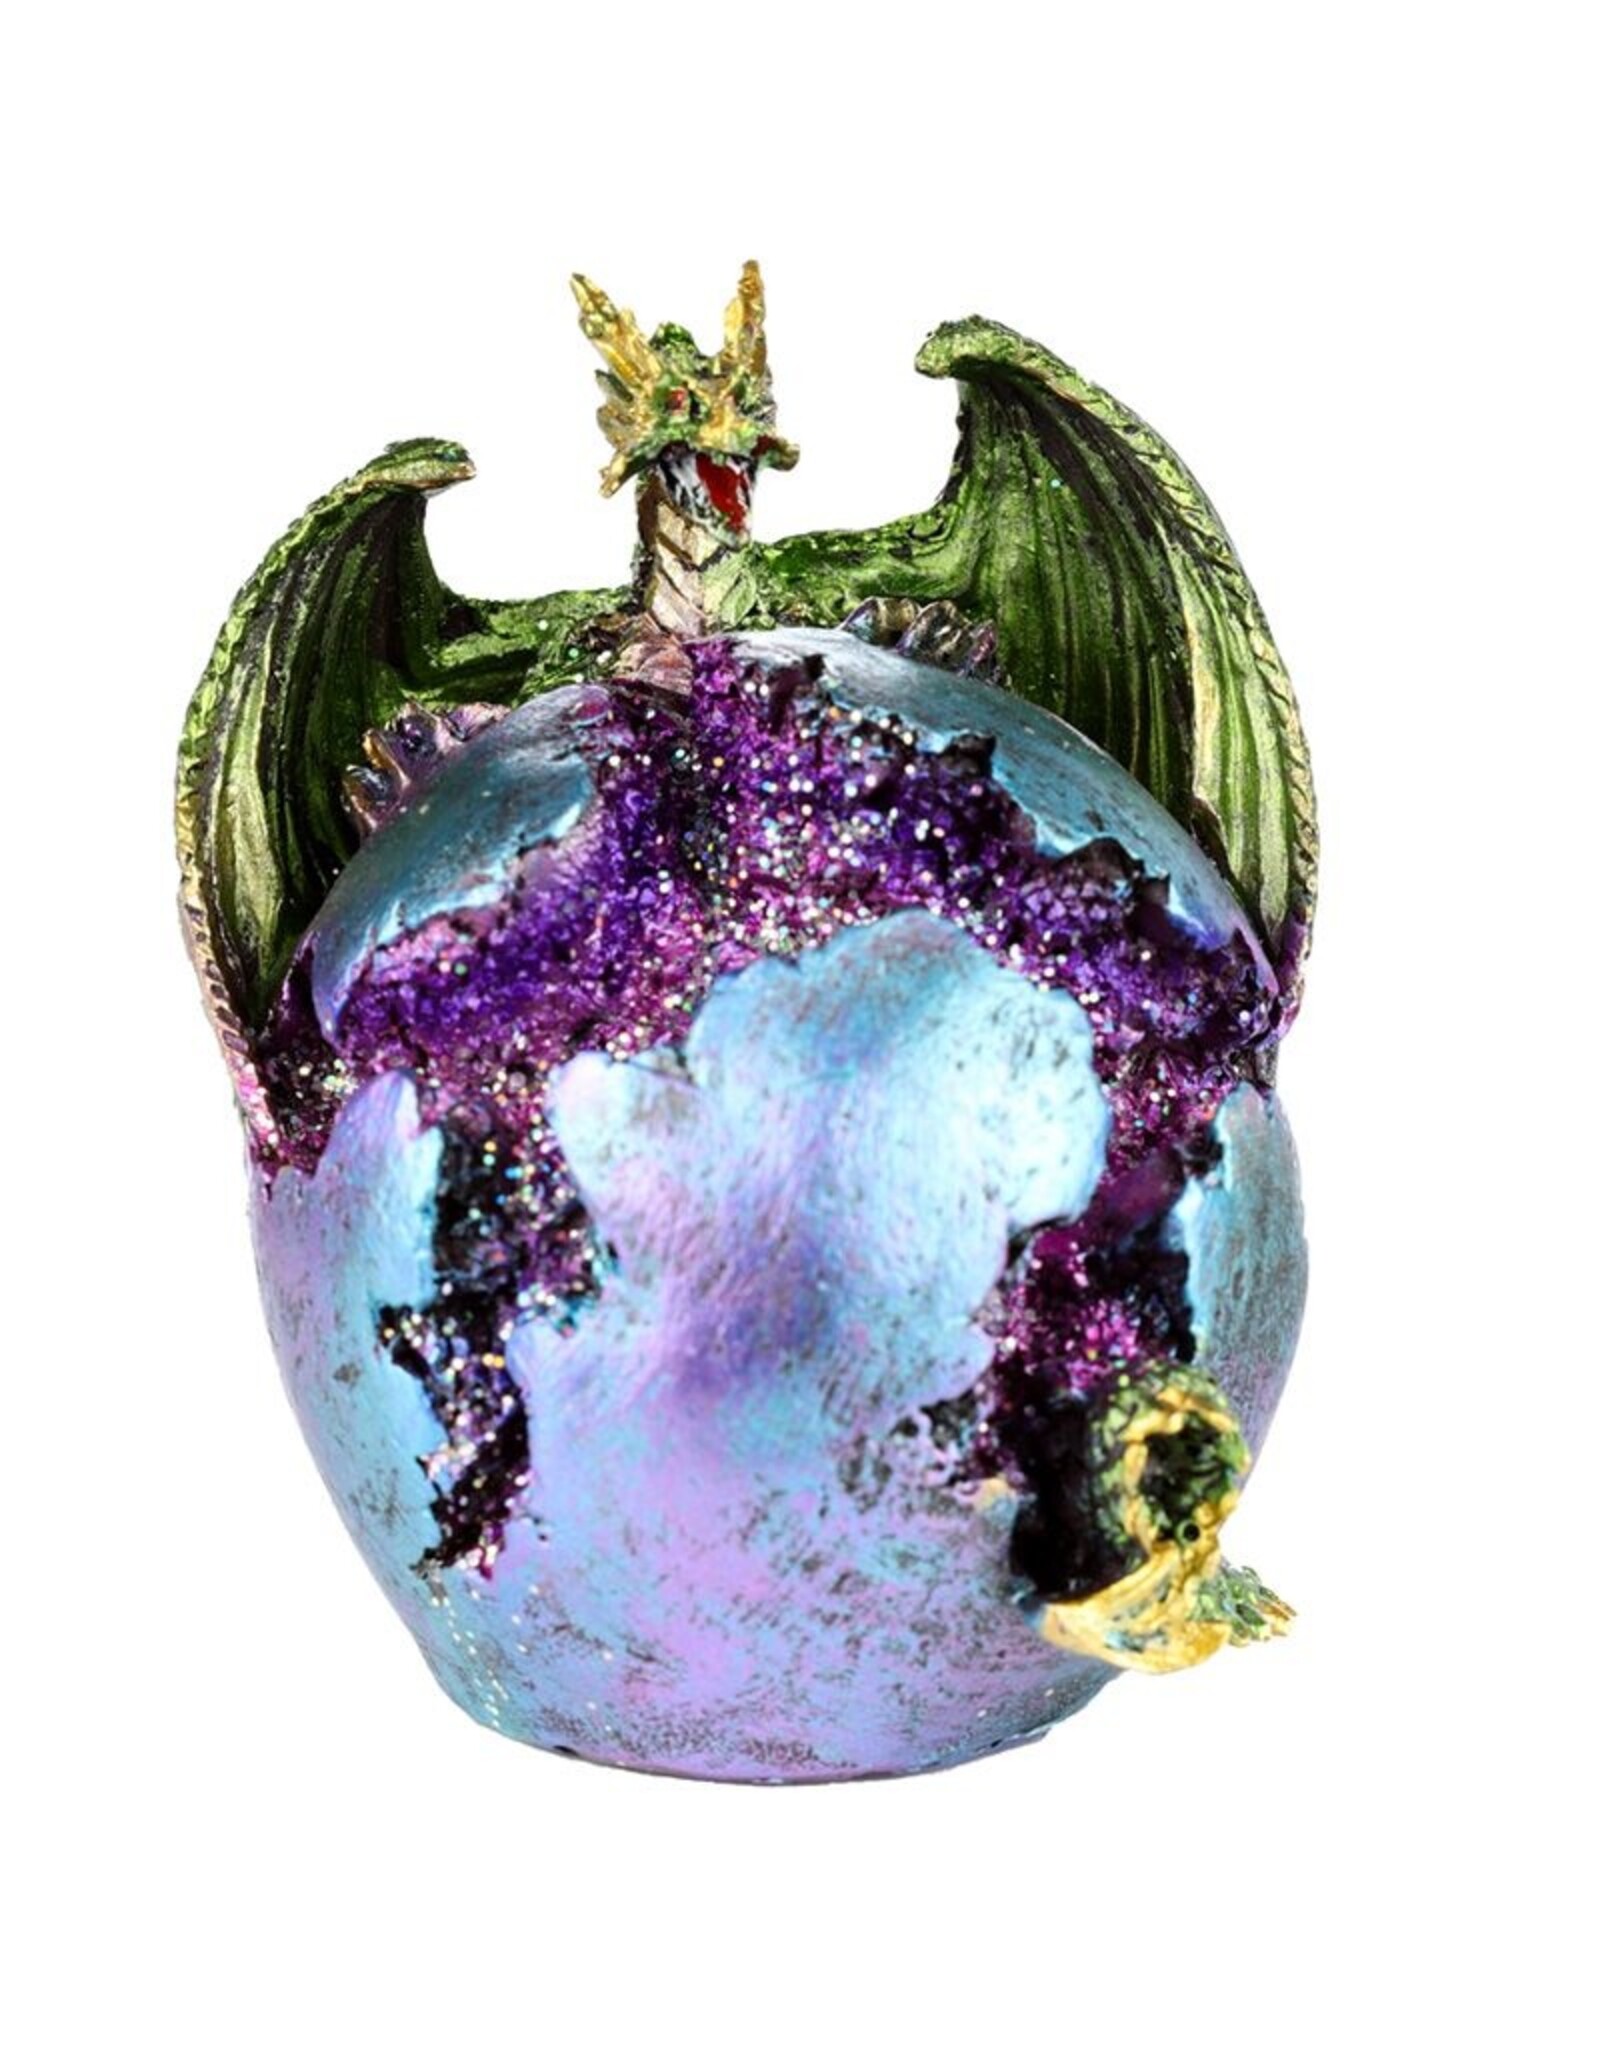 Puckator Giftware & Lifestyle - Dragon Crevice Keeper Geode Figurine LED (green)